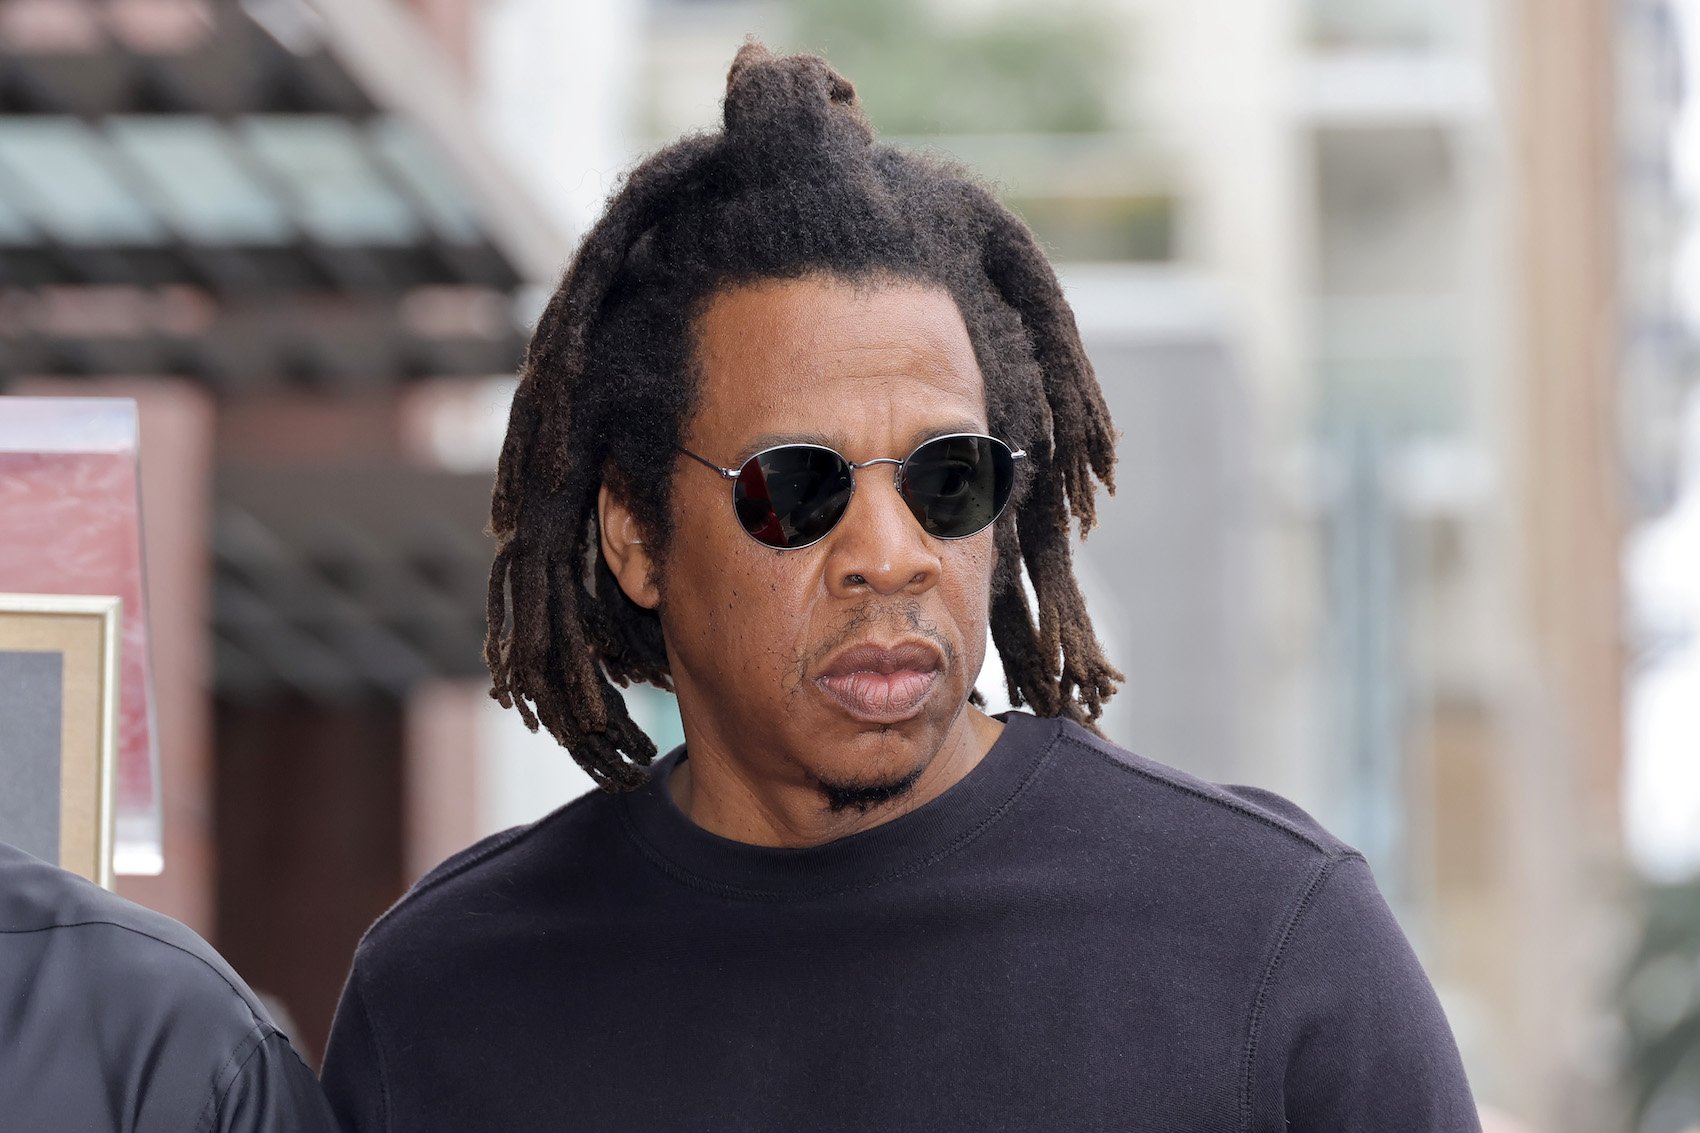 Jay-Z, who was in a lawsuit against the photographer behind some of his biggest album covers, posing for a photo wearing a black shirt and sunglasses